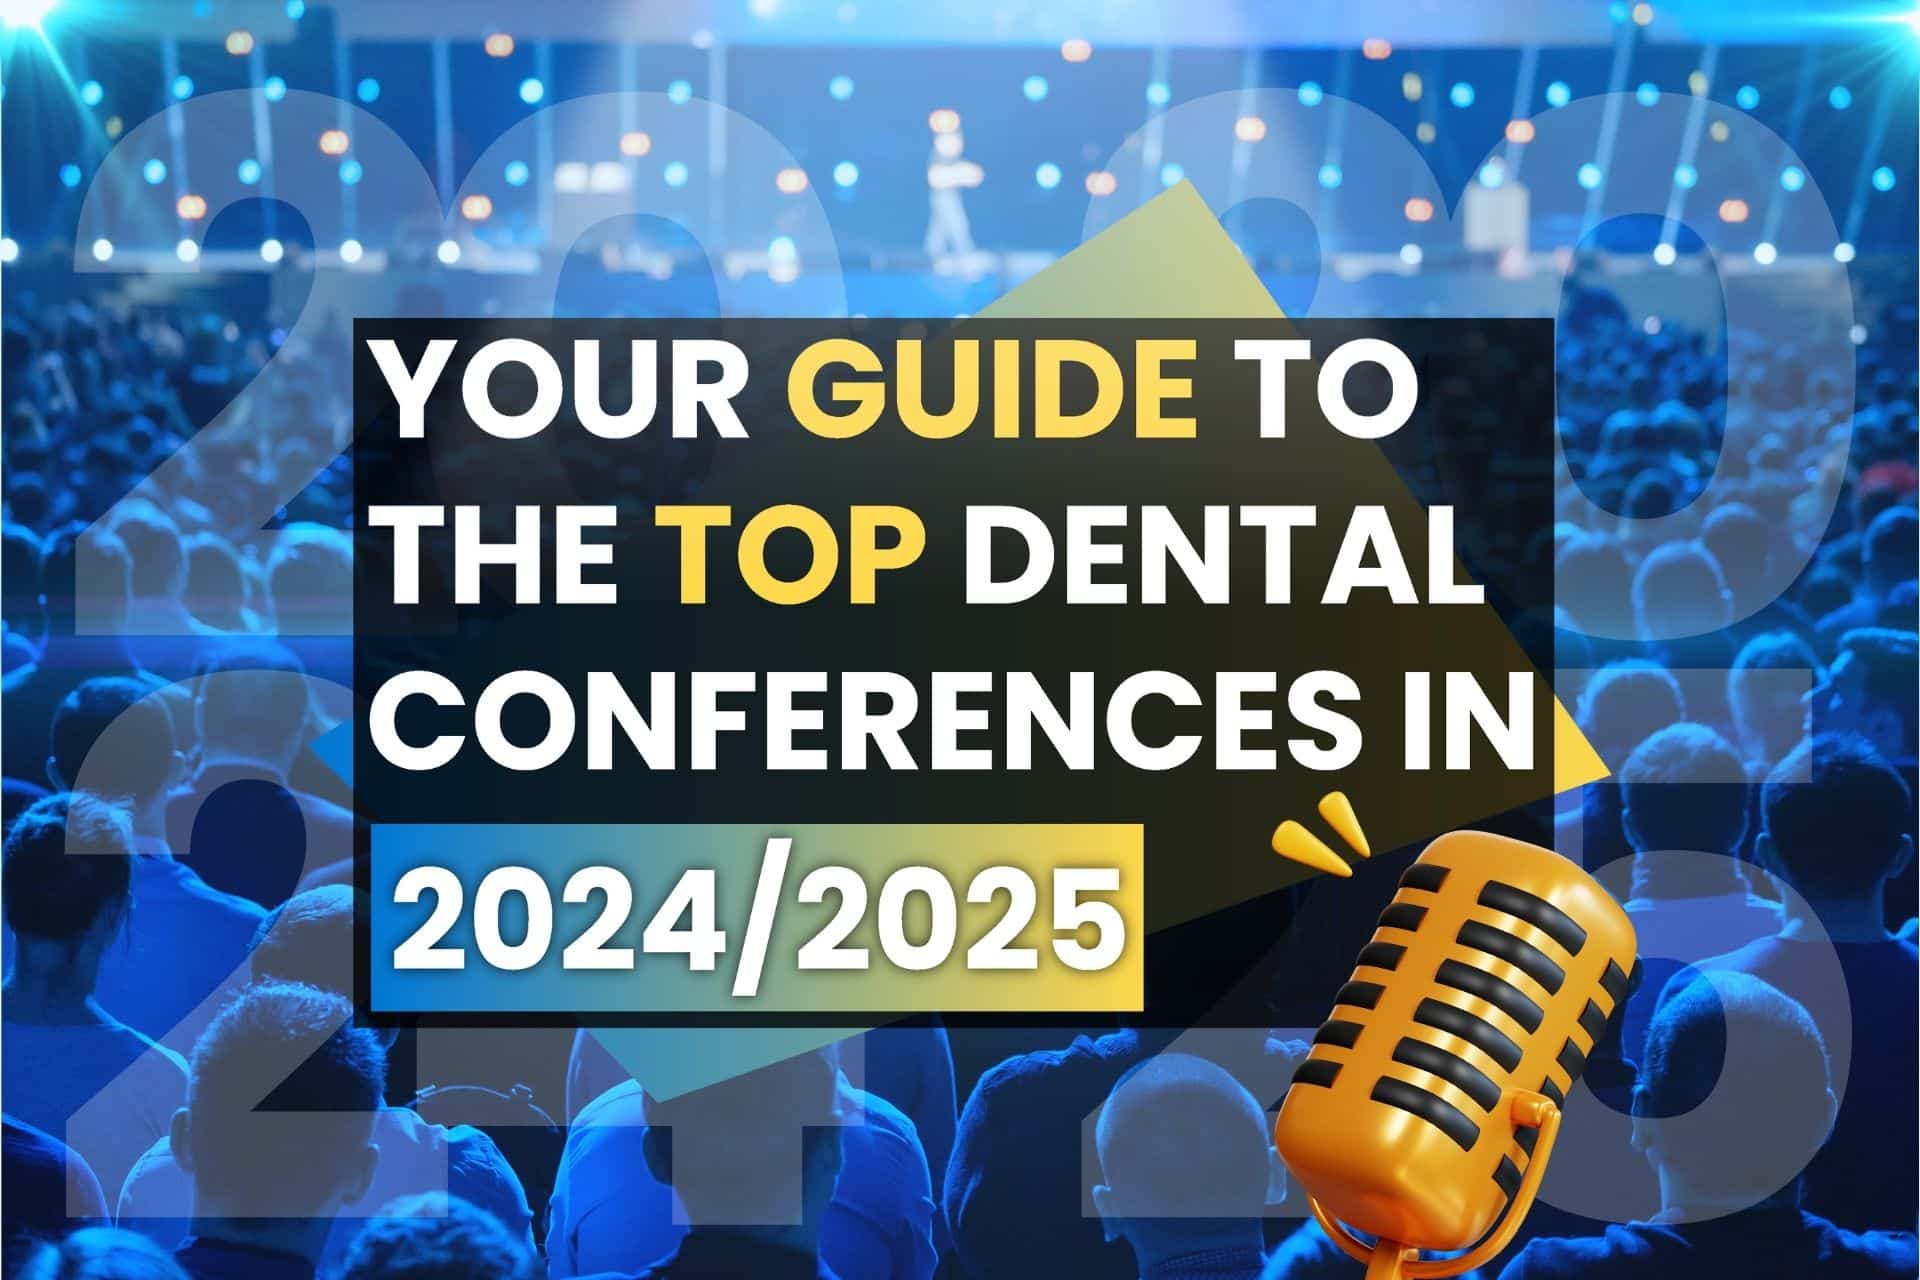 Your Guide to the Top Dental Conferences in 2024/2025